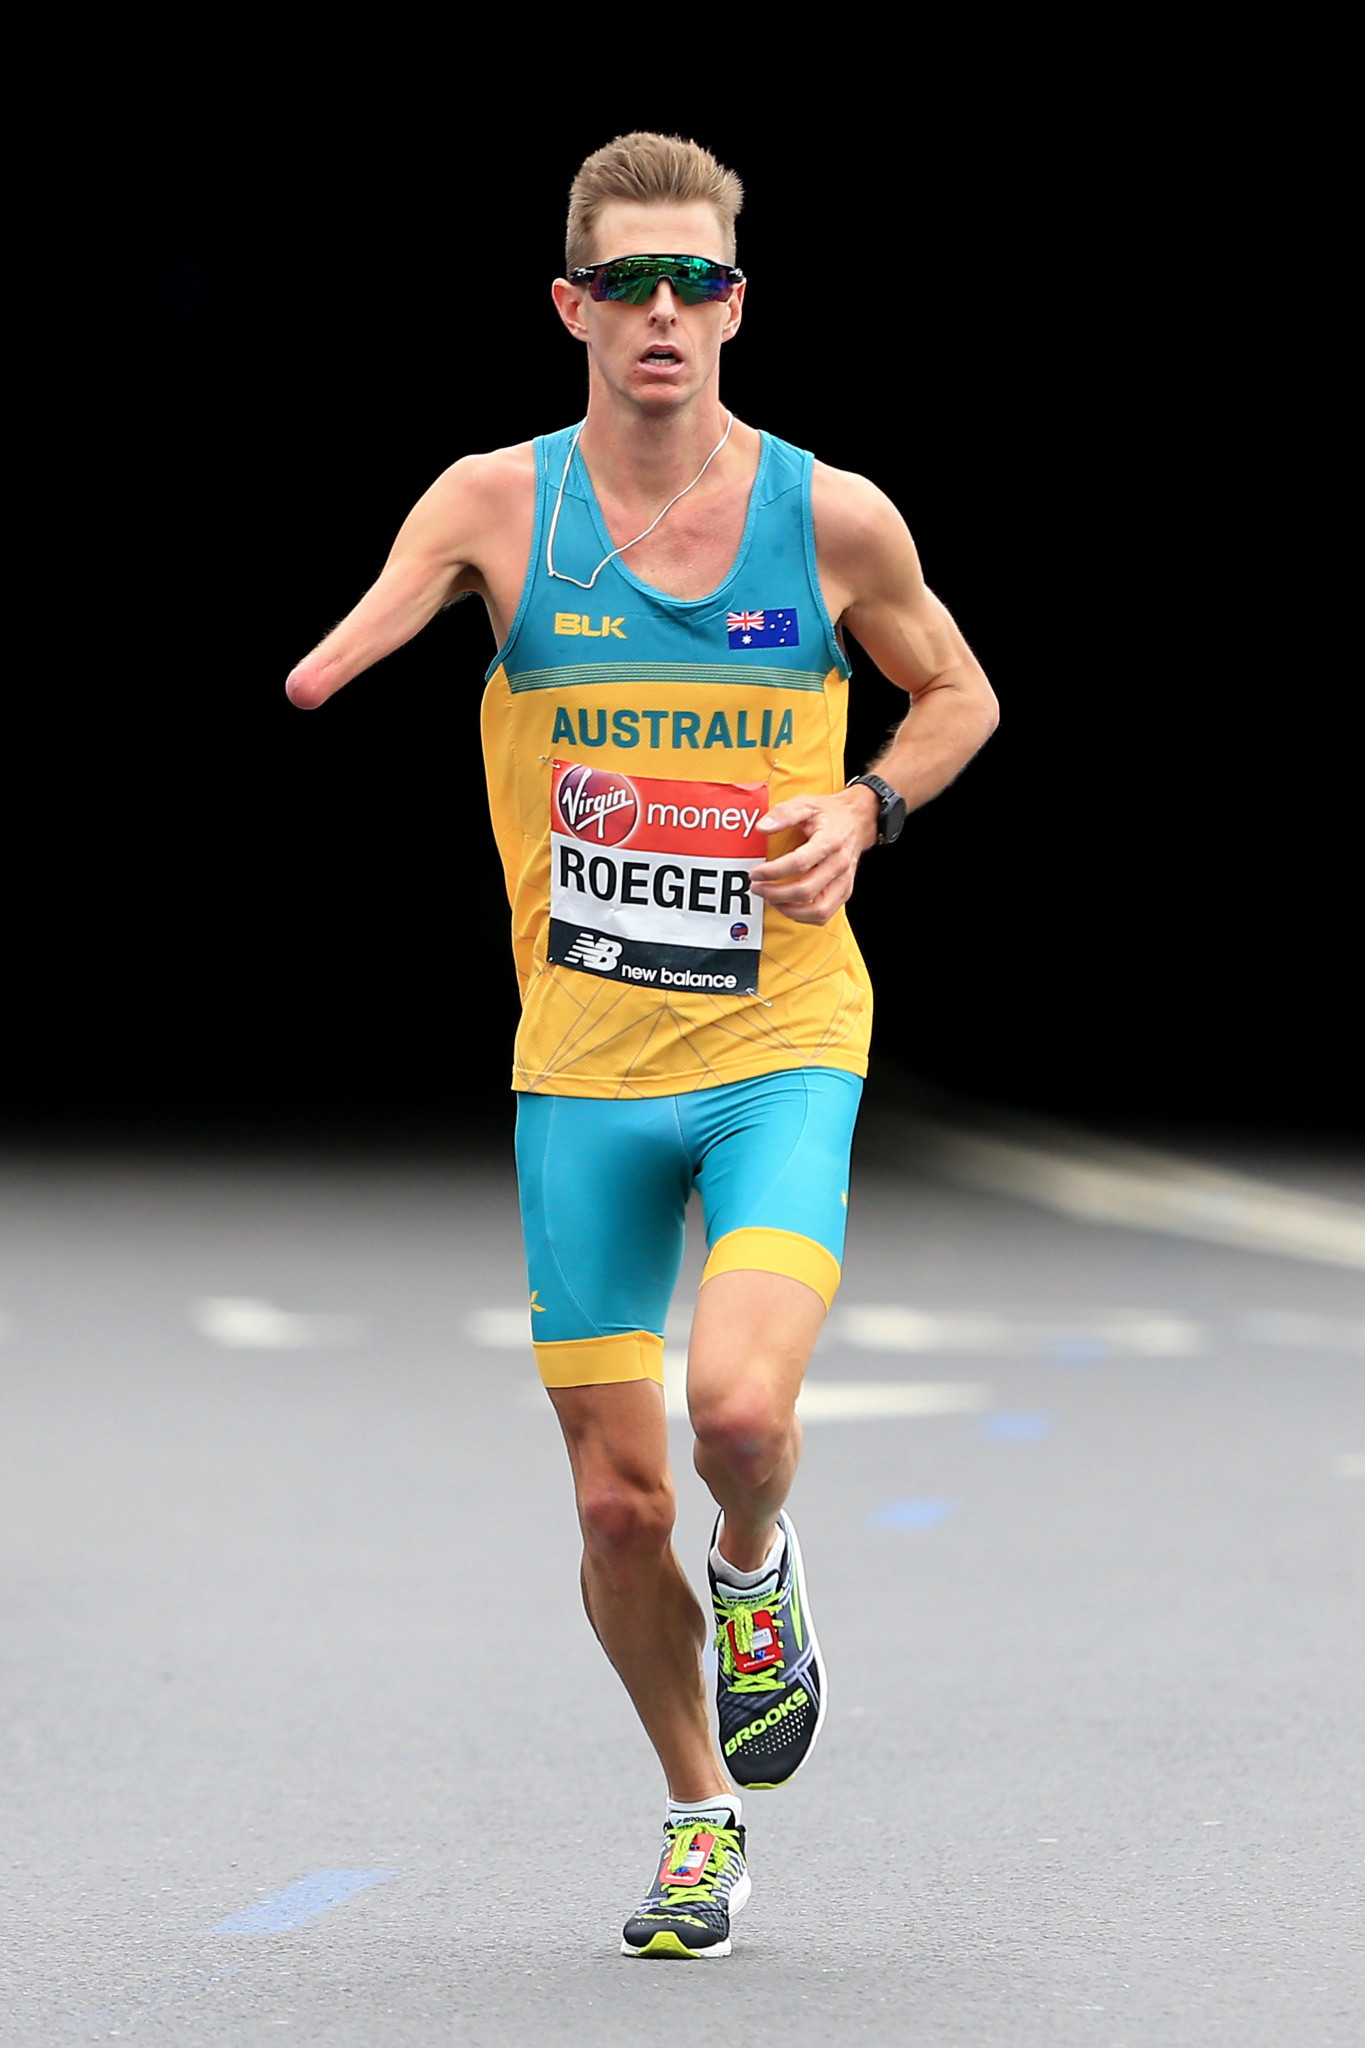 Australia's Michael Roeger has been nominated for the IPC athlete-of-the-month award for April ©Getty Images